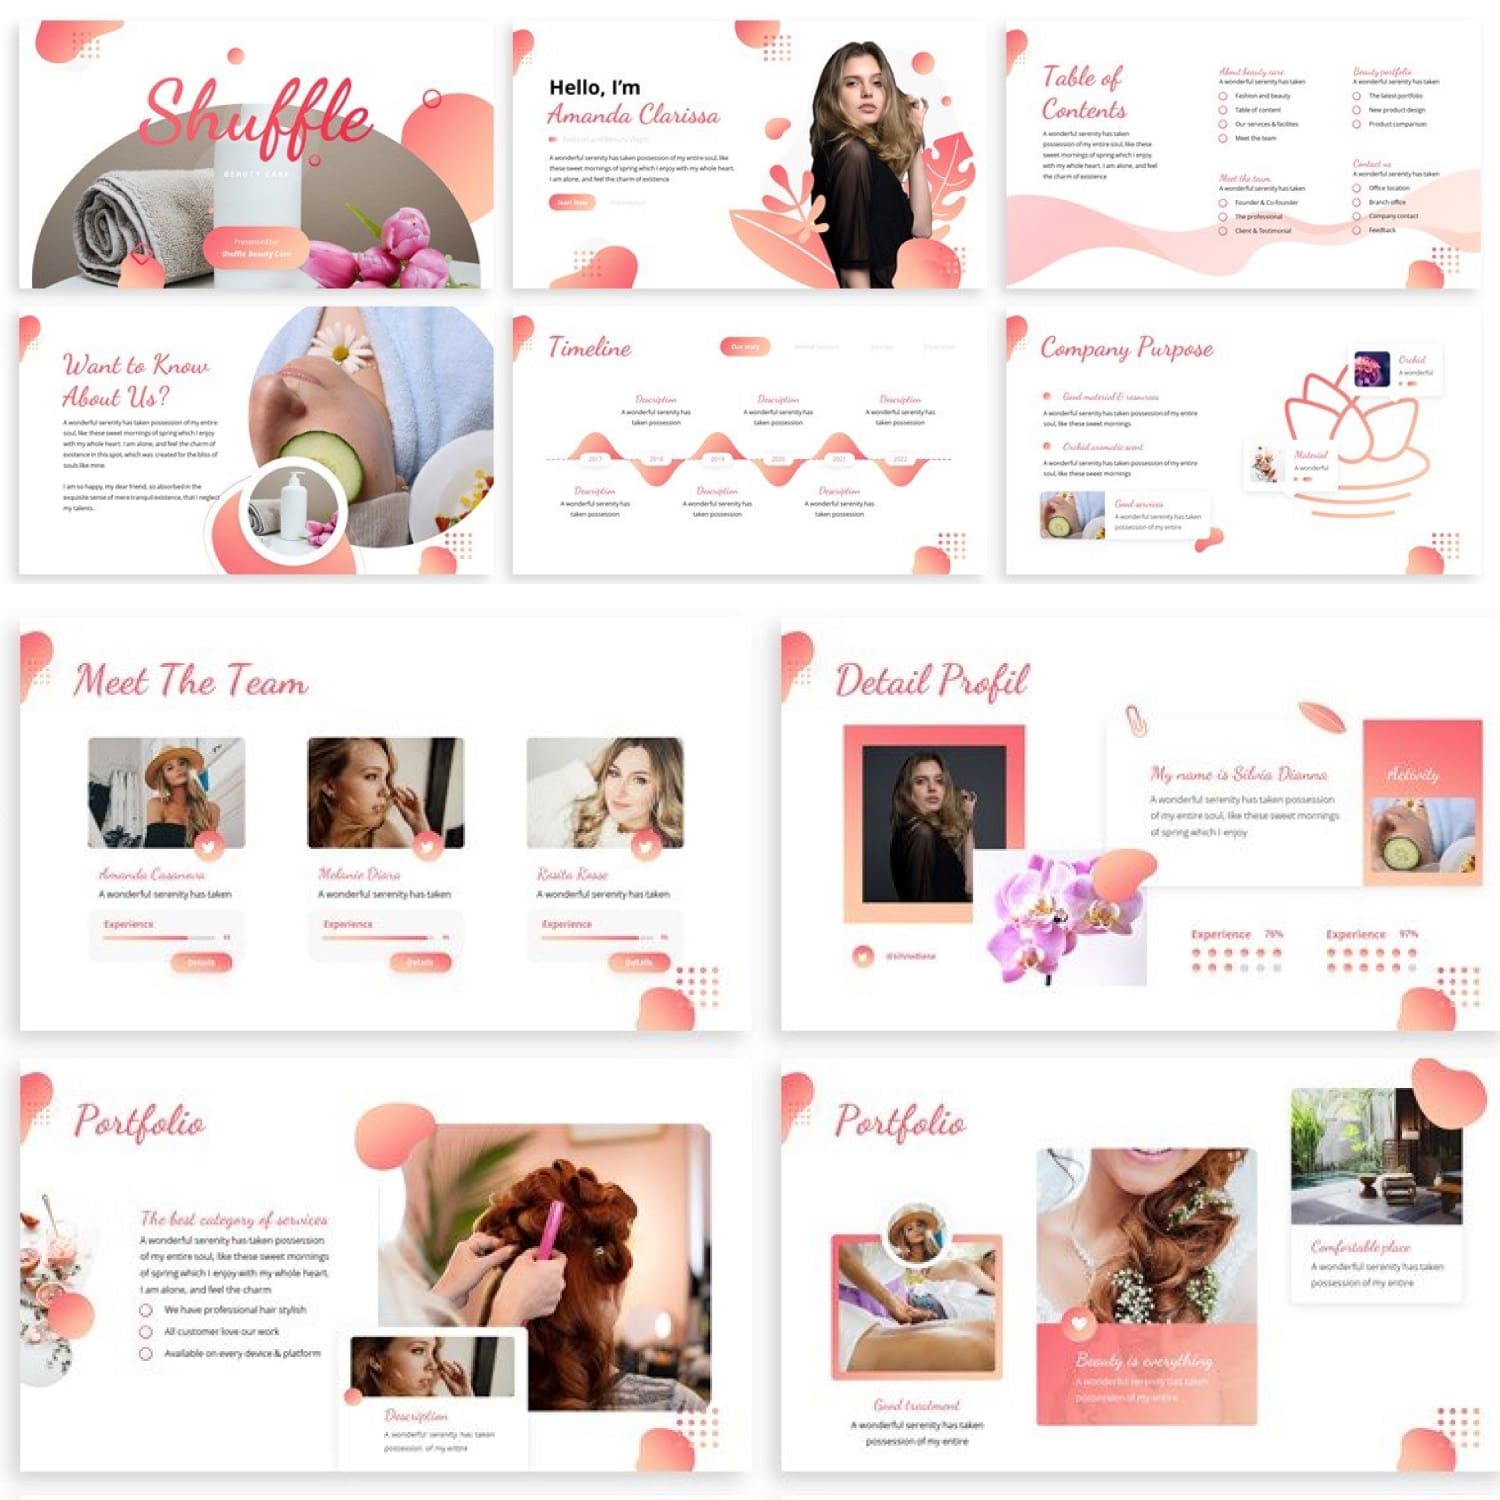 Shuffle - Beauty Care Powerpoint cover.